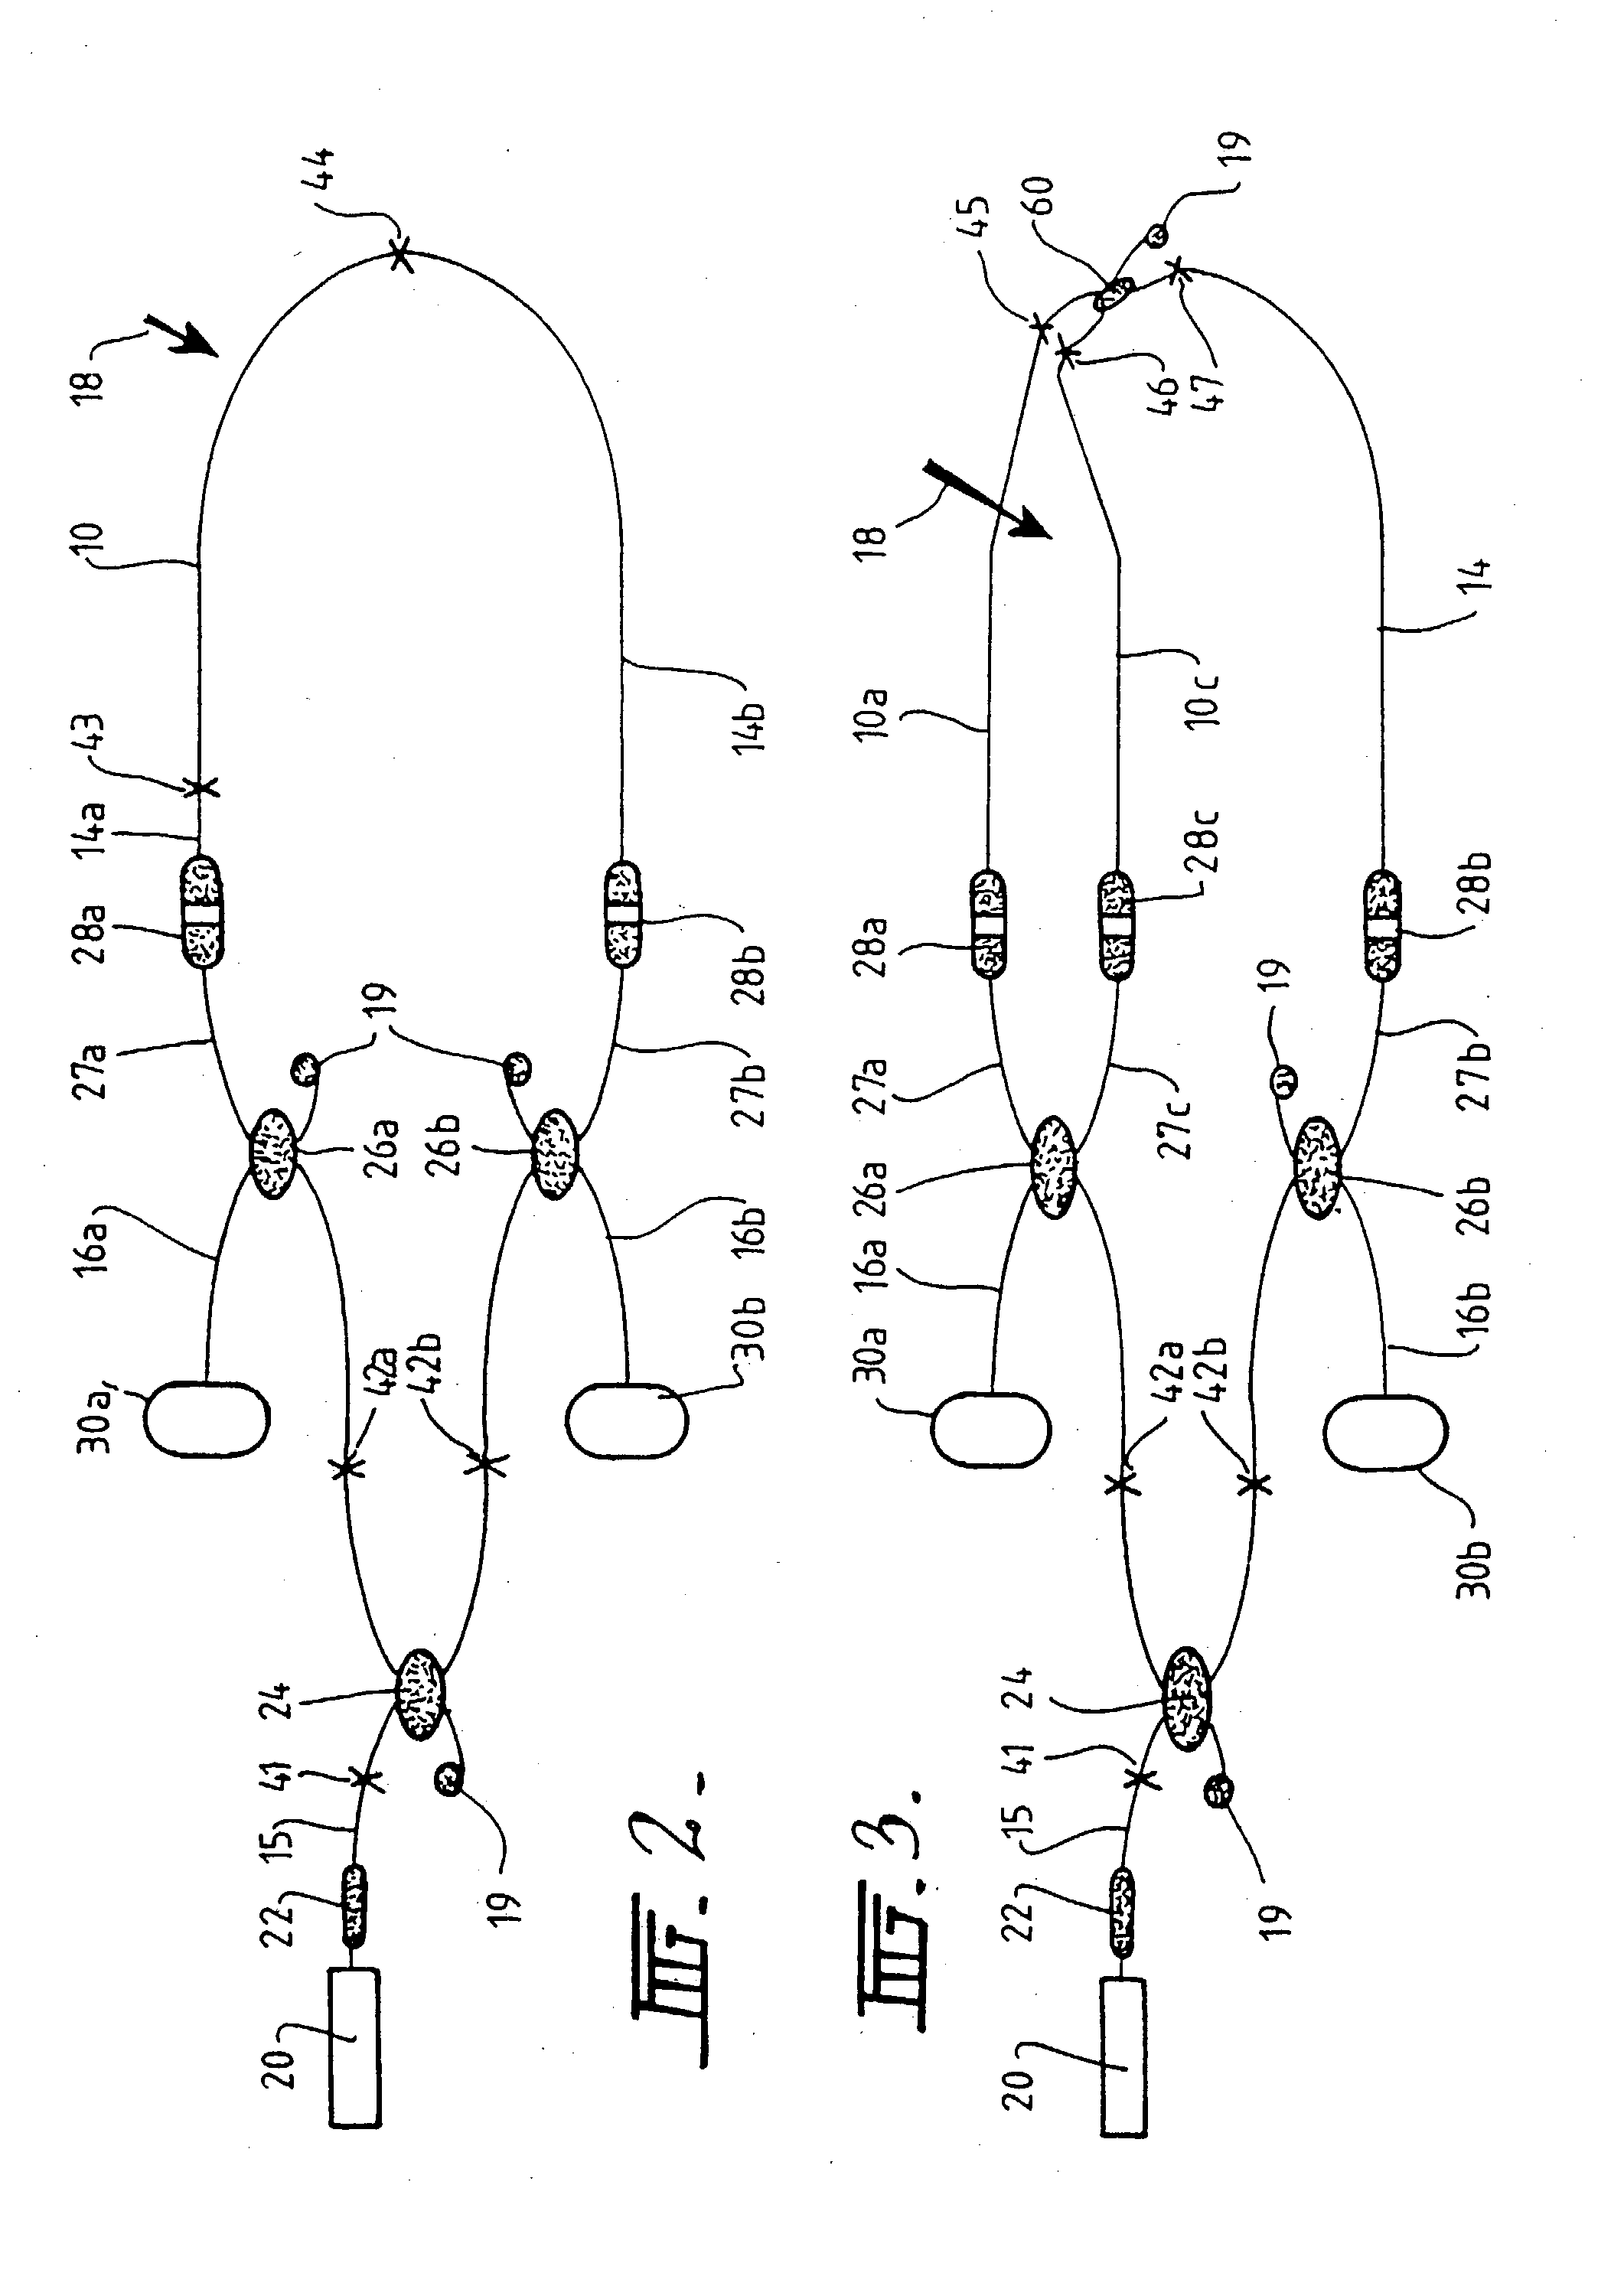 Apparatus and method for monitoring a structure using a counter-propagating signal method for locating events